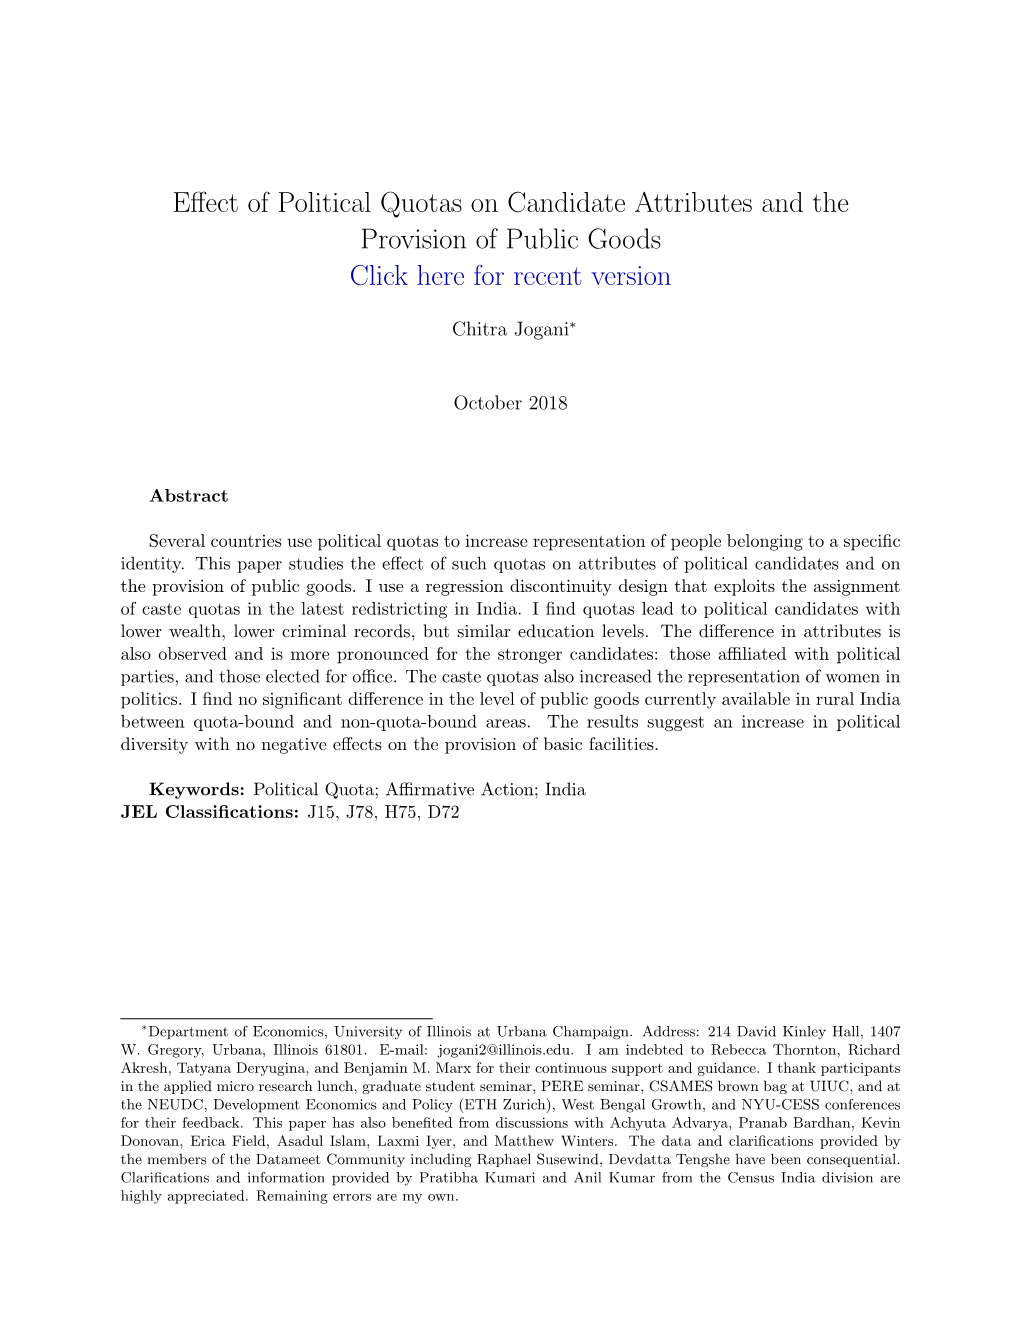 Effect of Political Quotas on Candidate Attributes and the Provision Of